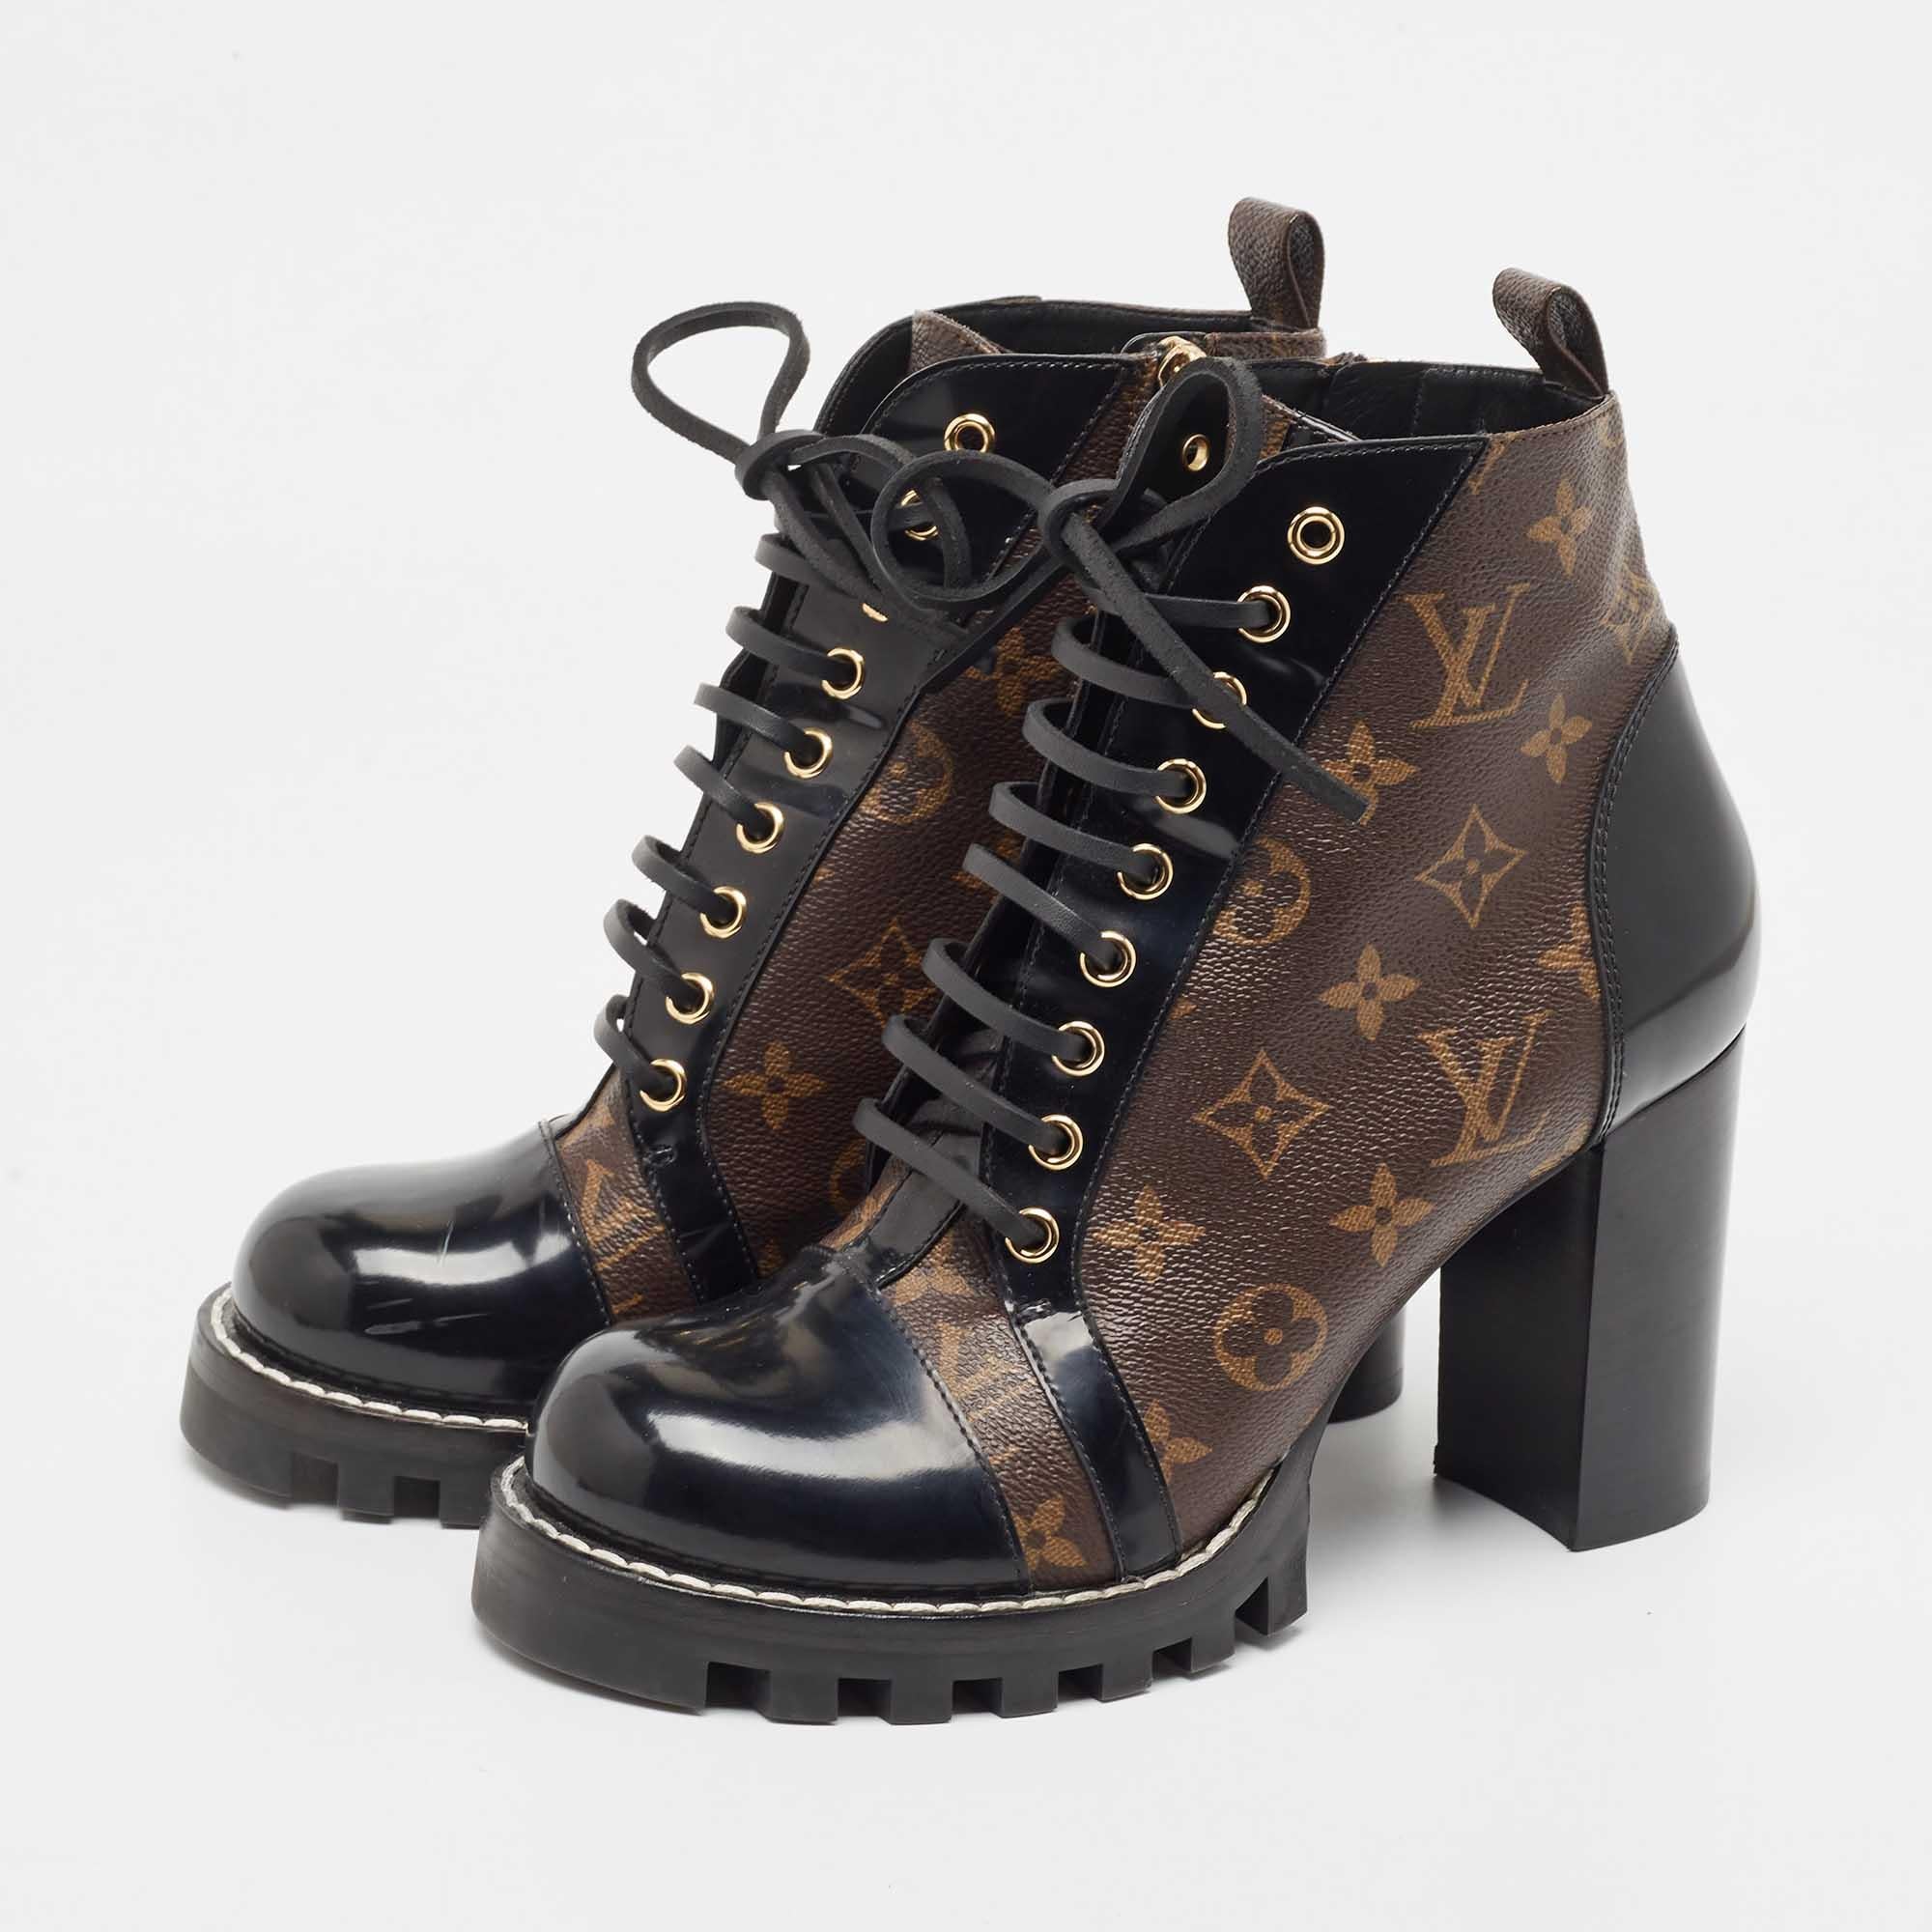 Louis Vuitton Brown Monogram Canvas and Patent Leather Star Trail Ankle Boots Si In Excellent Condition For Sale In Dubai, Al Qouz 2